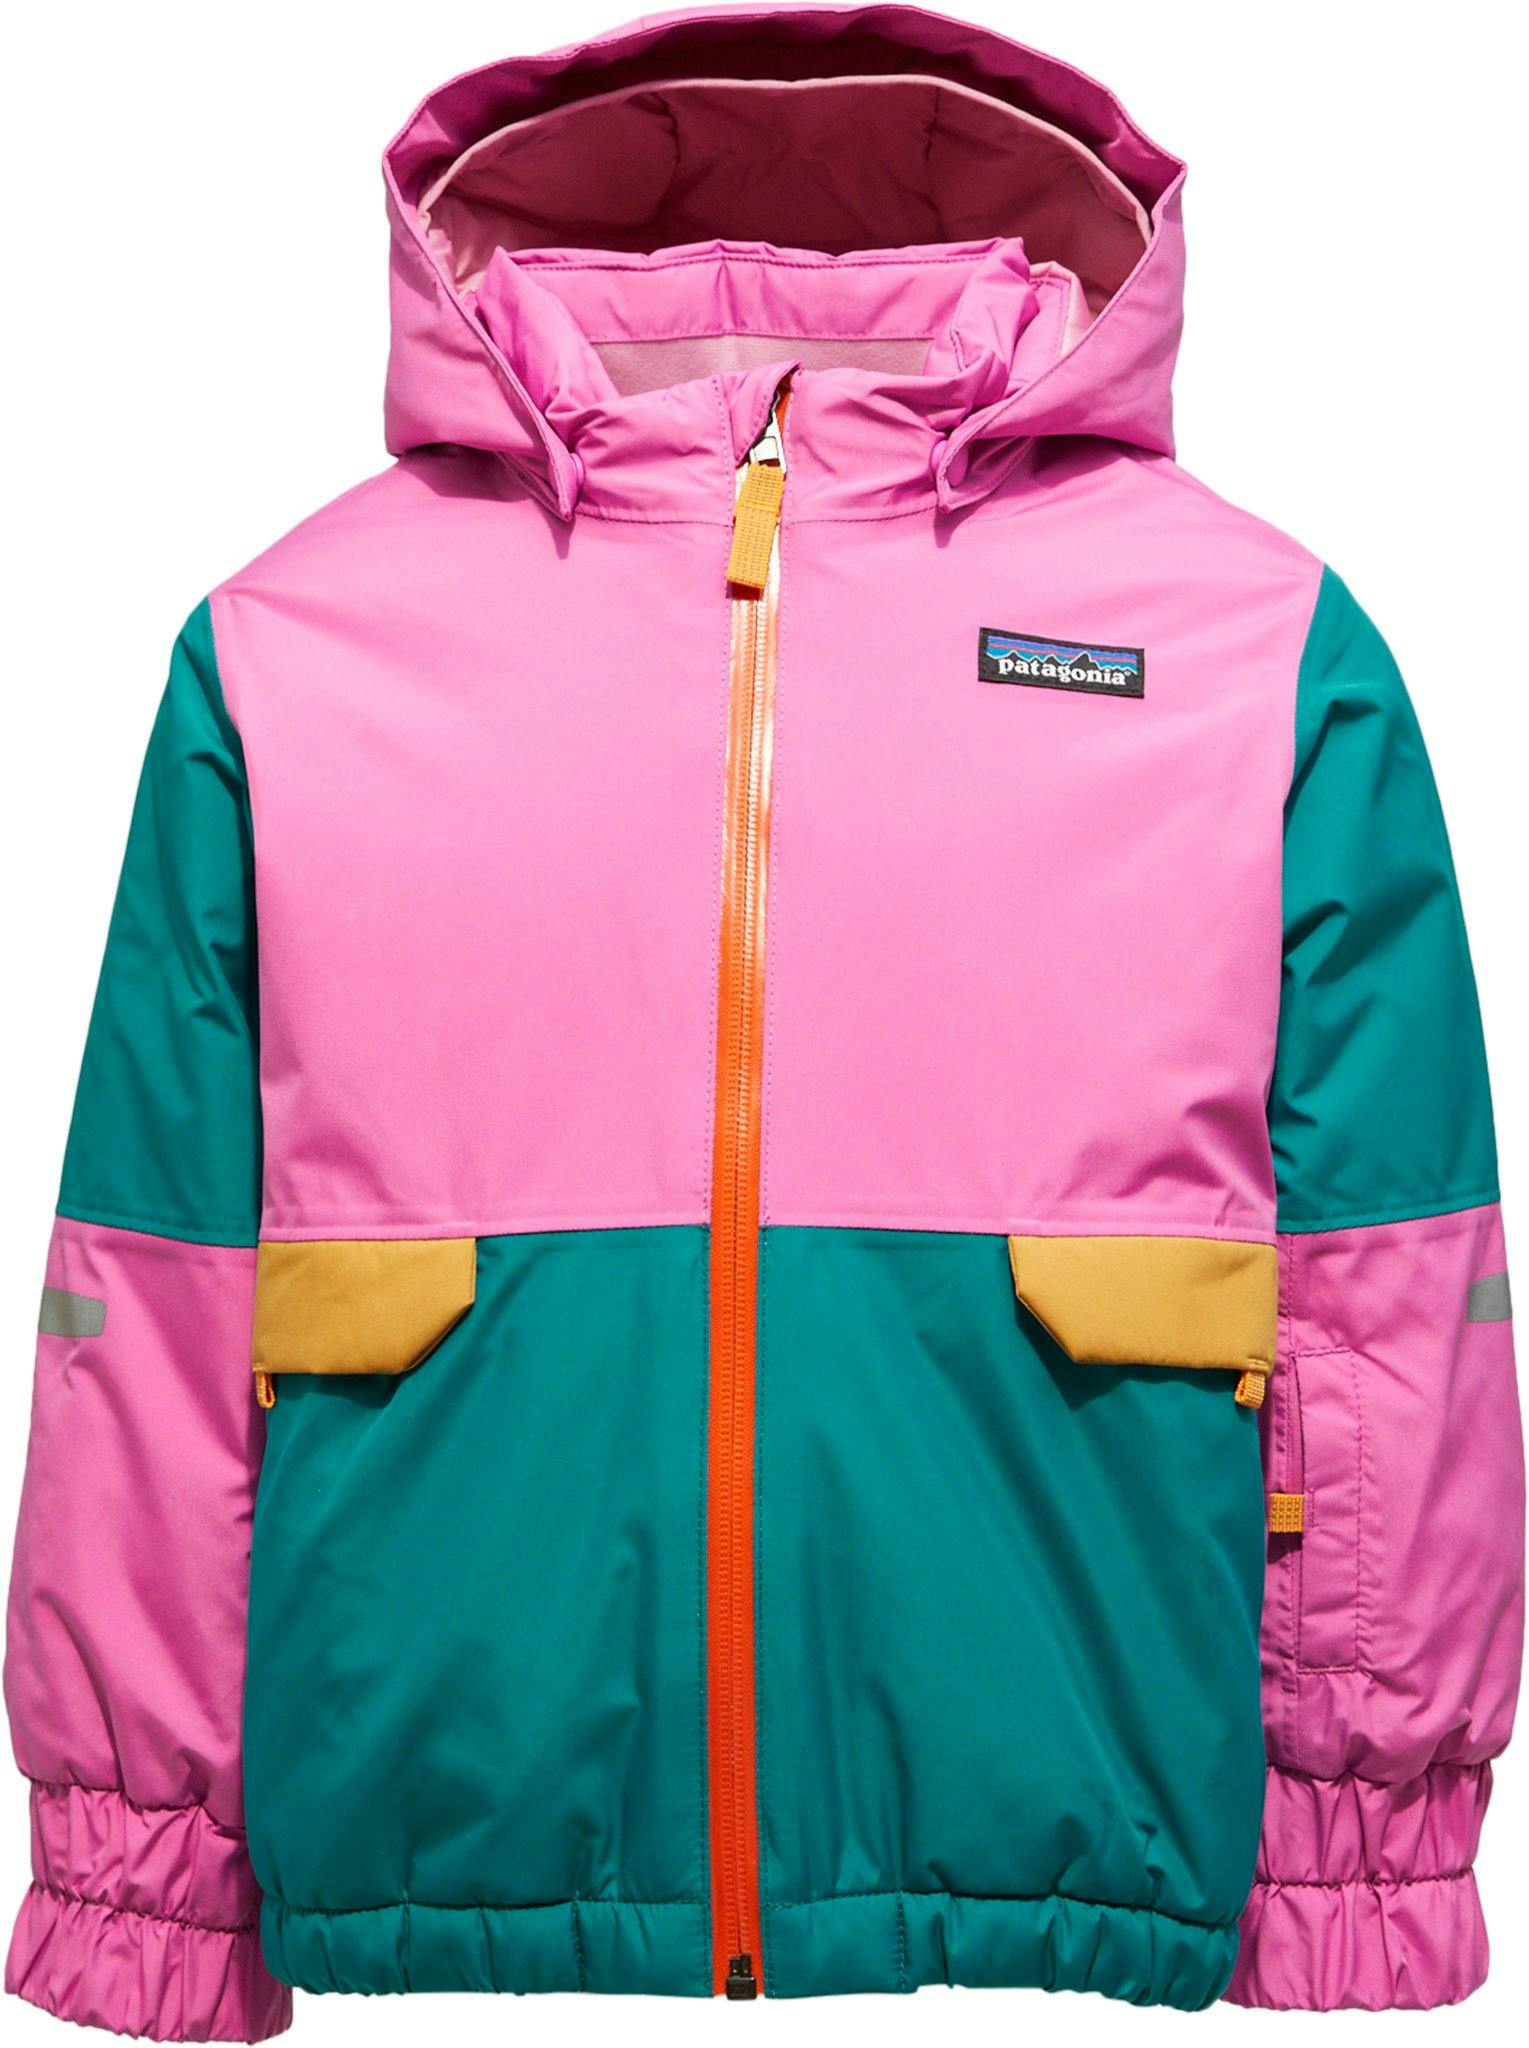 Product image for Snow Pile Jacket - Toddler